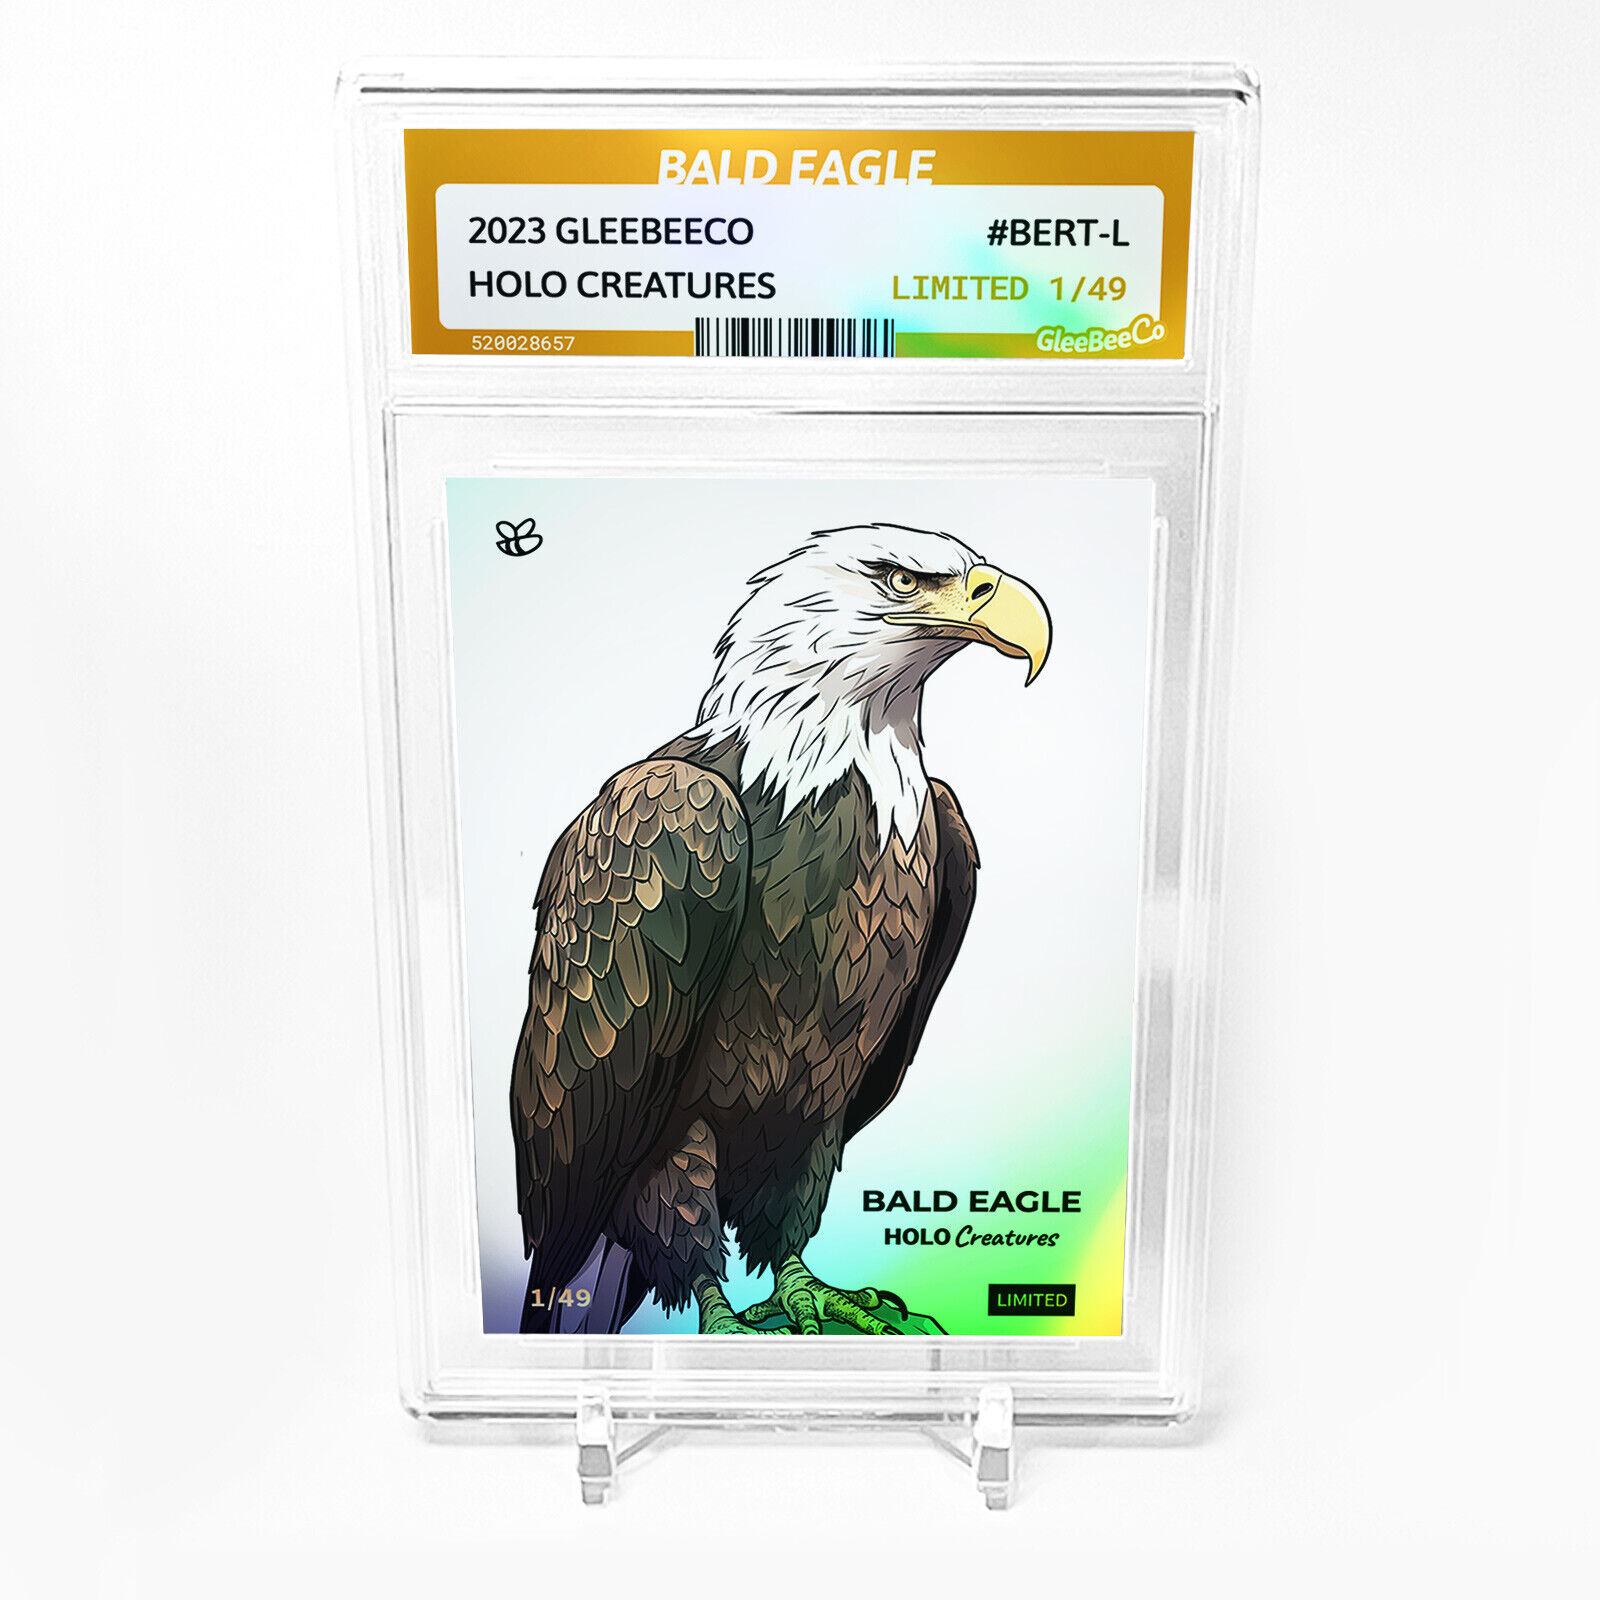 BALD EAGLE Holographic Card GleeBeeCo #BERT-L LIMITED to /49 BEAUTIFUL